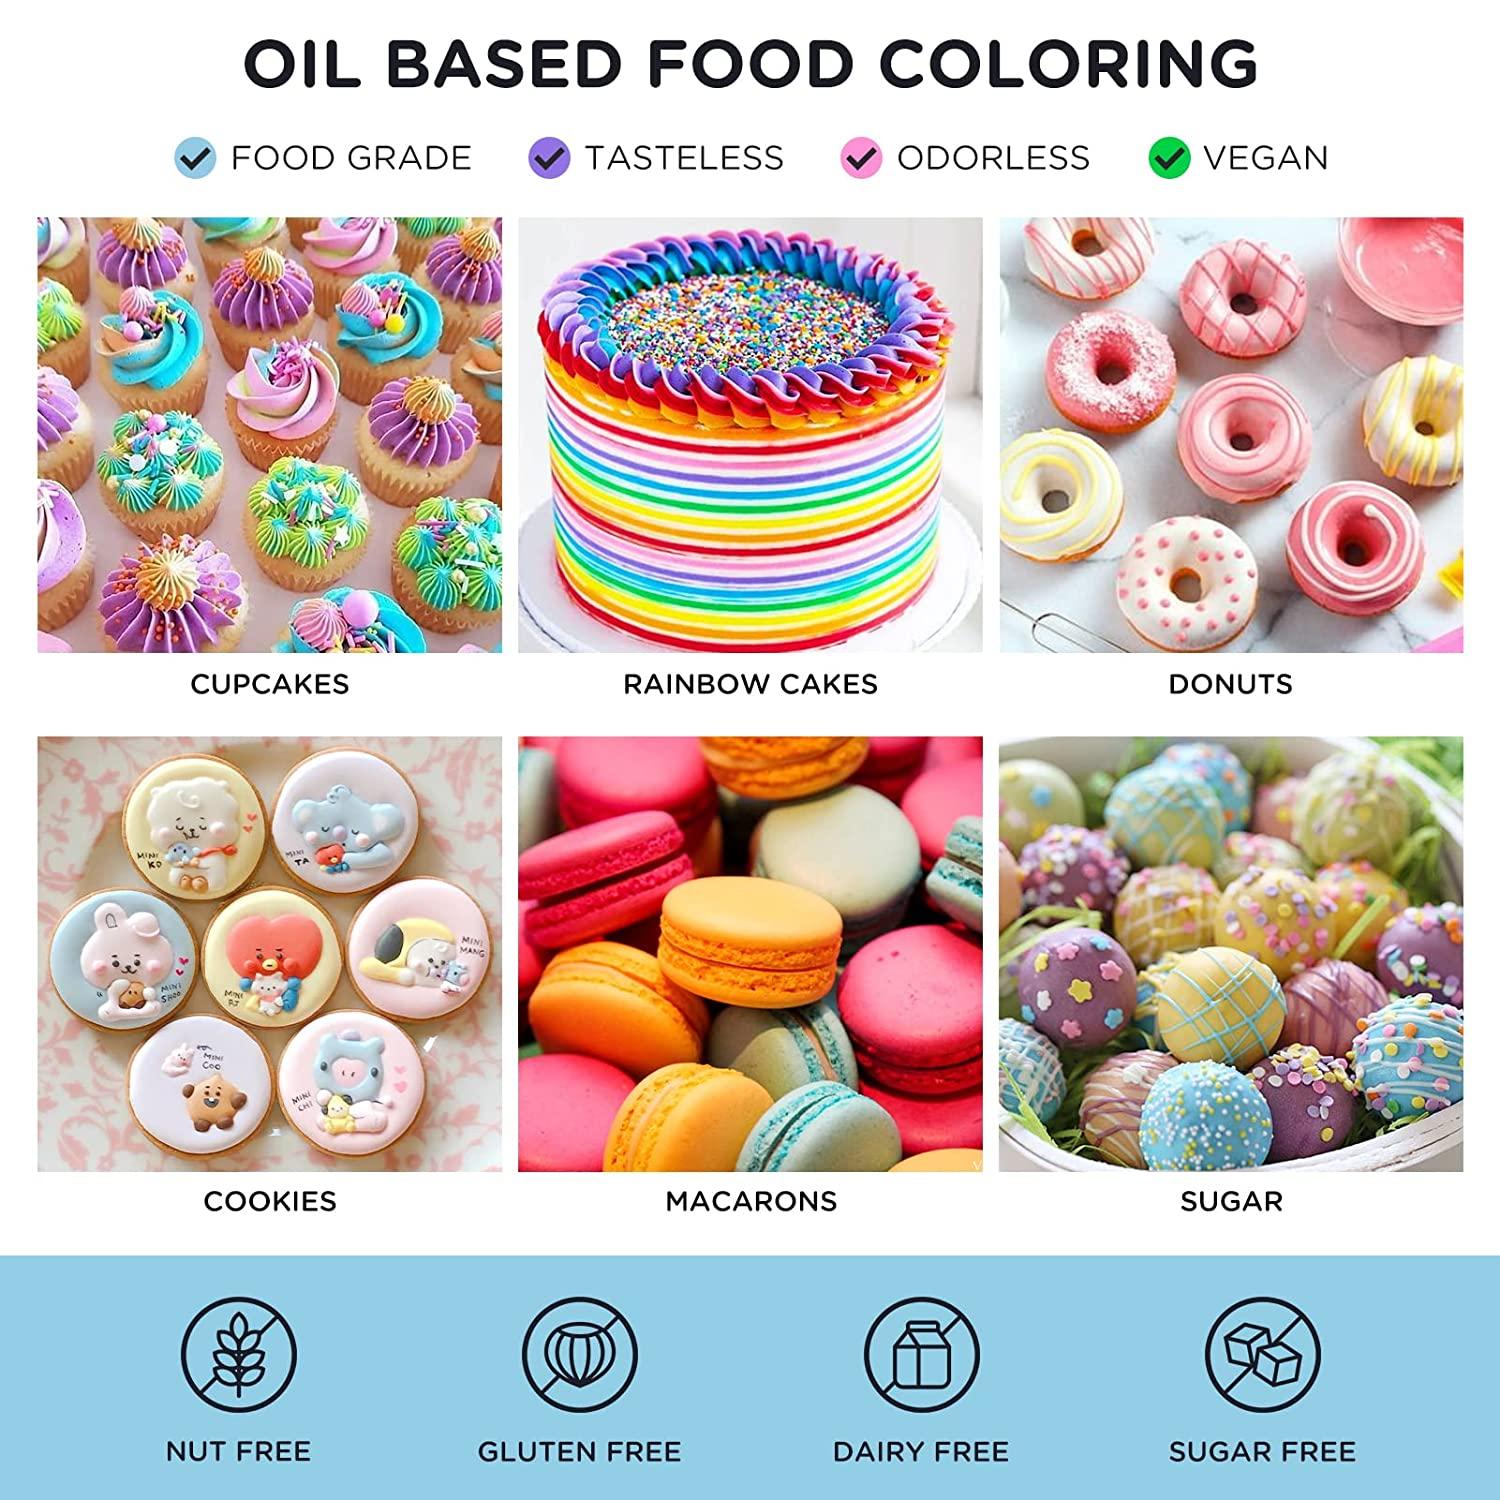 Oil Based Food Coloring for Chocolate 12 Colors Edible Food Dye for Sugar  Candy Melts, Cherrysea Oil Frosting Icing Dye for Baking Cookies Fondant  Food Color for Cake Decorating - 0.35 Fl. Oz Bottles